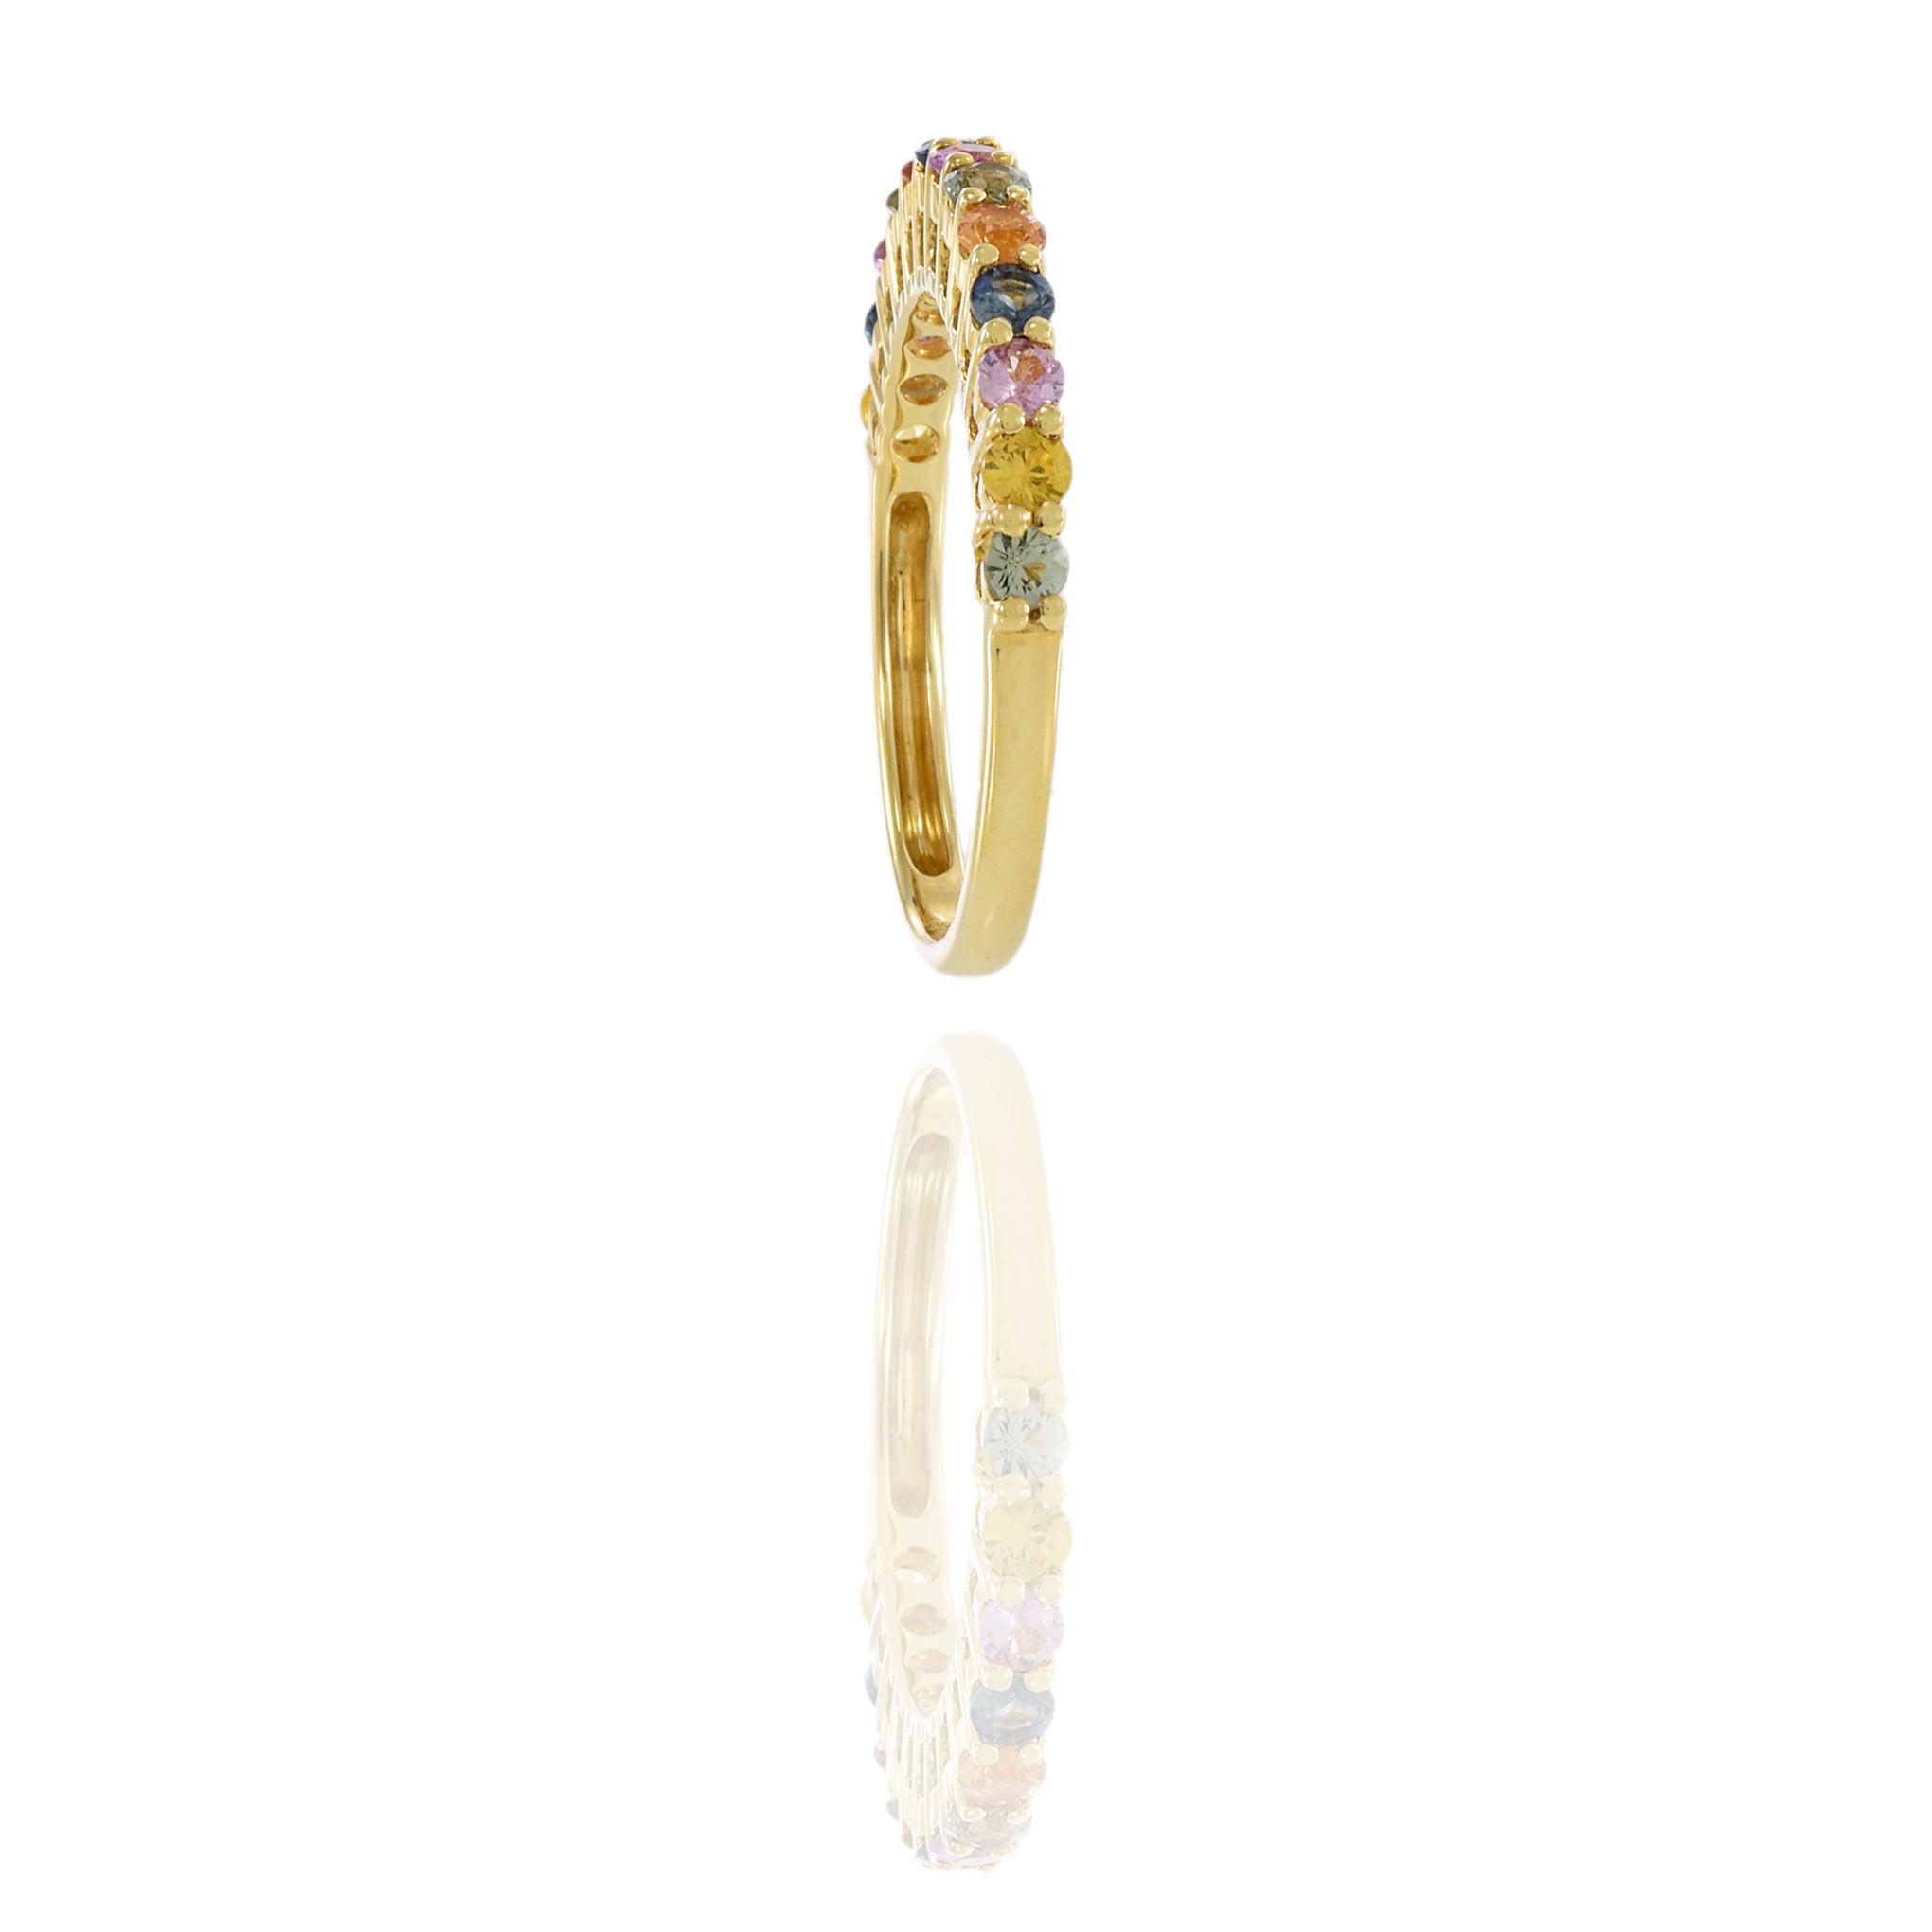 18KT Yellow Gold Multi Color Sapphire Band